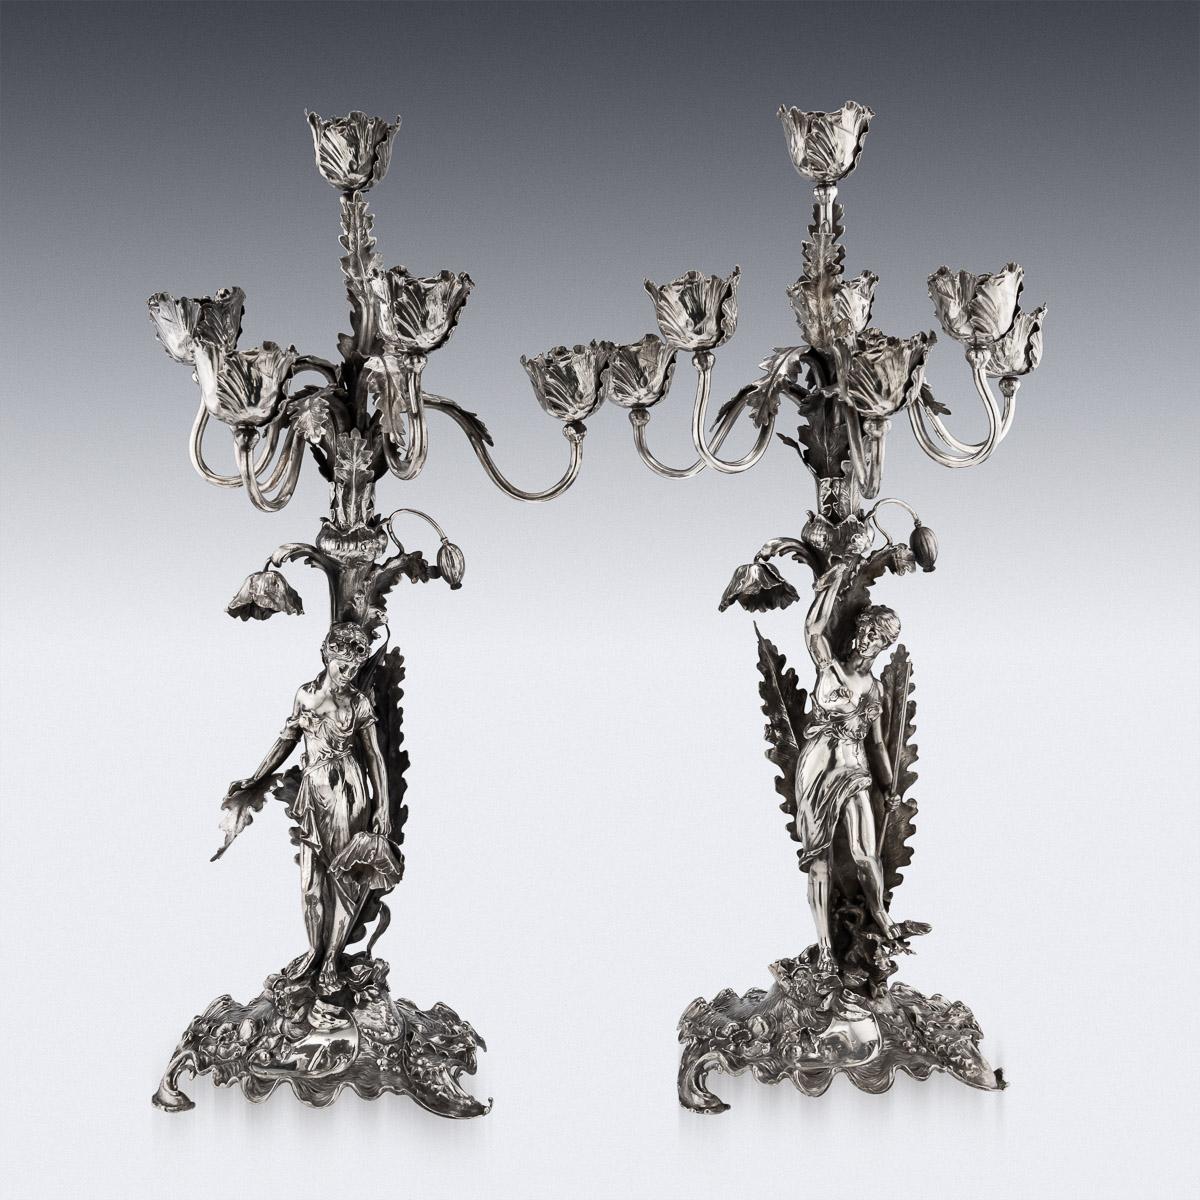 20th Century German Art Nouveau silver monumental seven-light candelabra, beautifully modelled, on shaped and beautifully decorated bases, applied with whiplash leaves, the two amazonian female figures, one holding a flower and the other a fish and